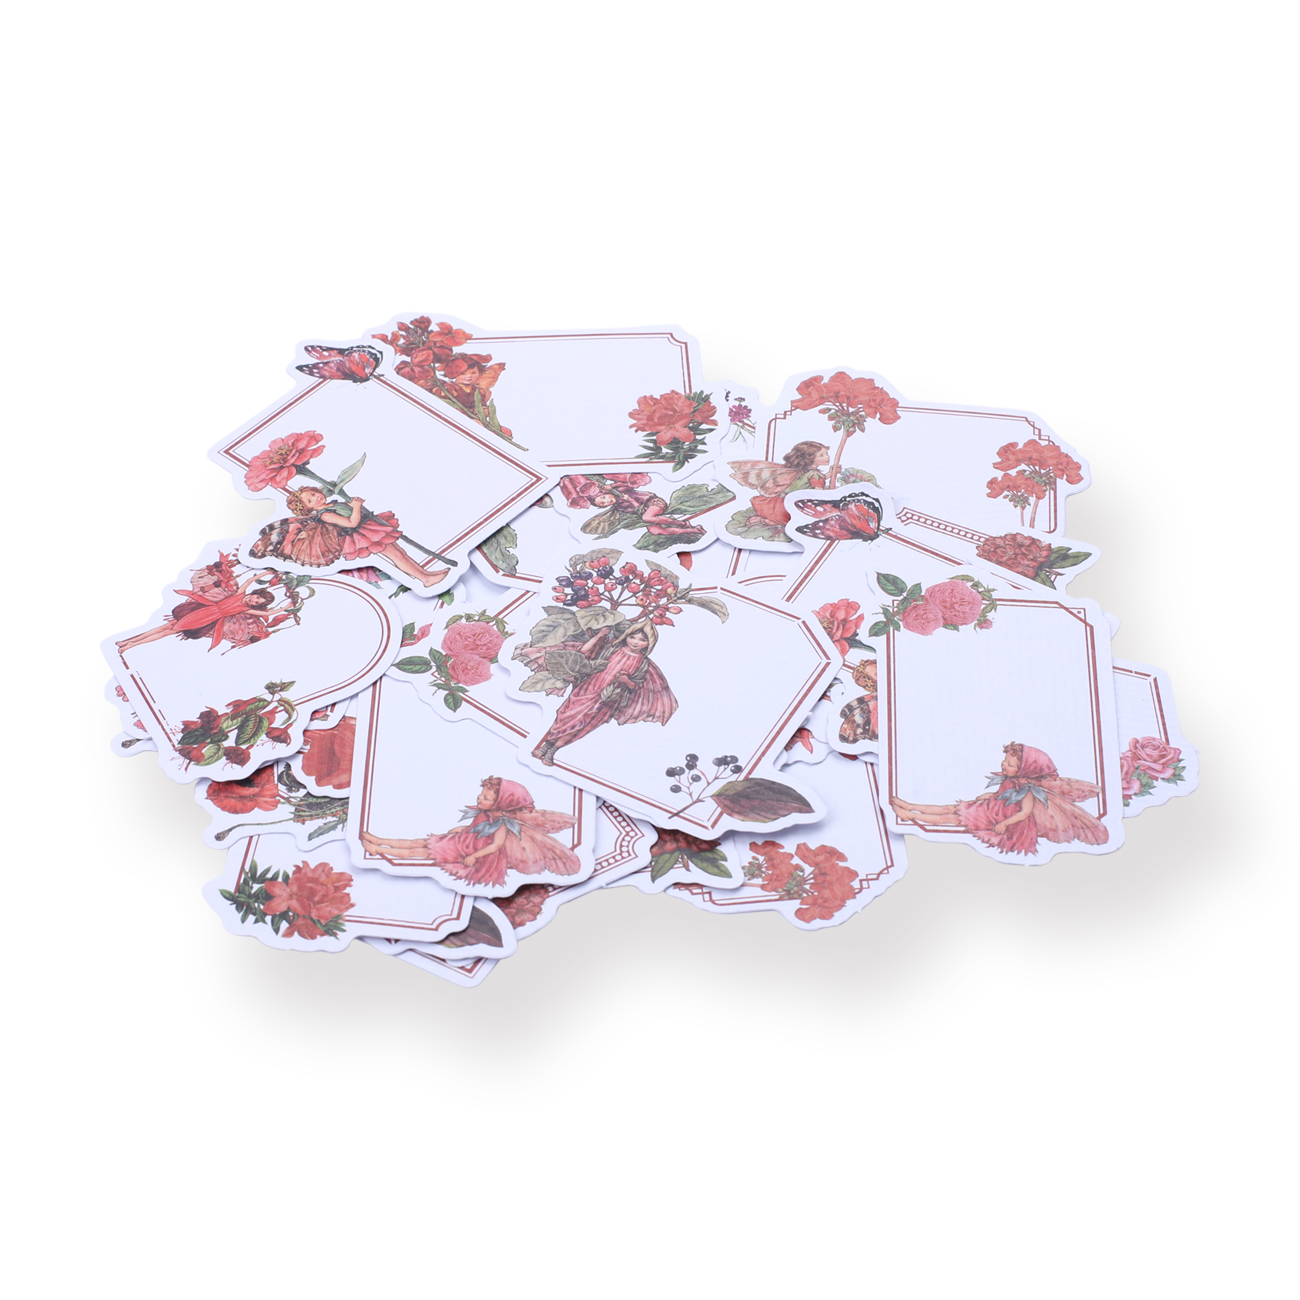 Flower Fairy Stickers - Red - Stationery Pal